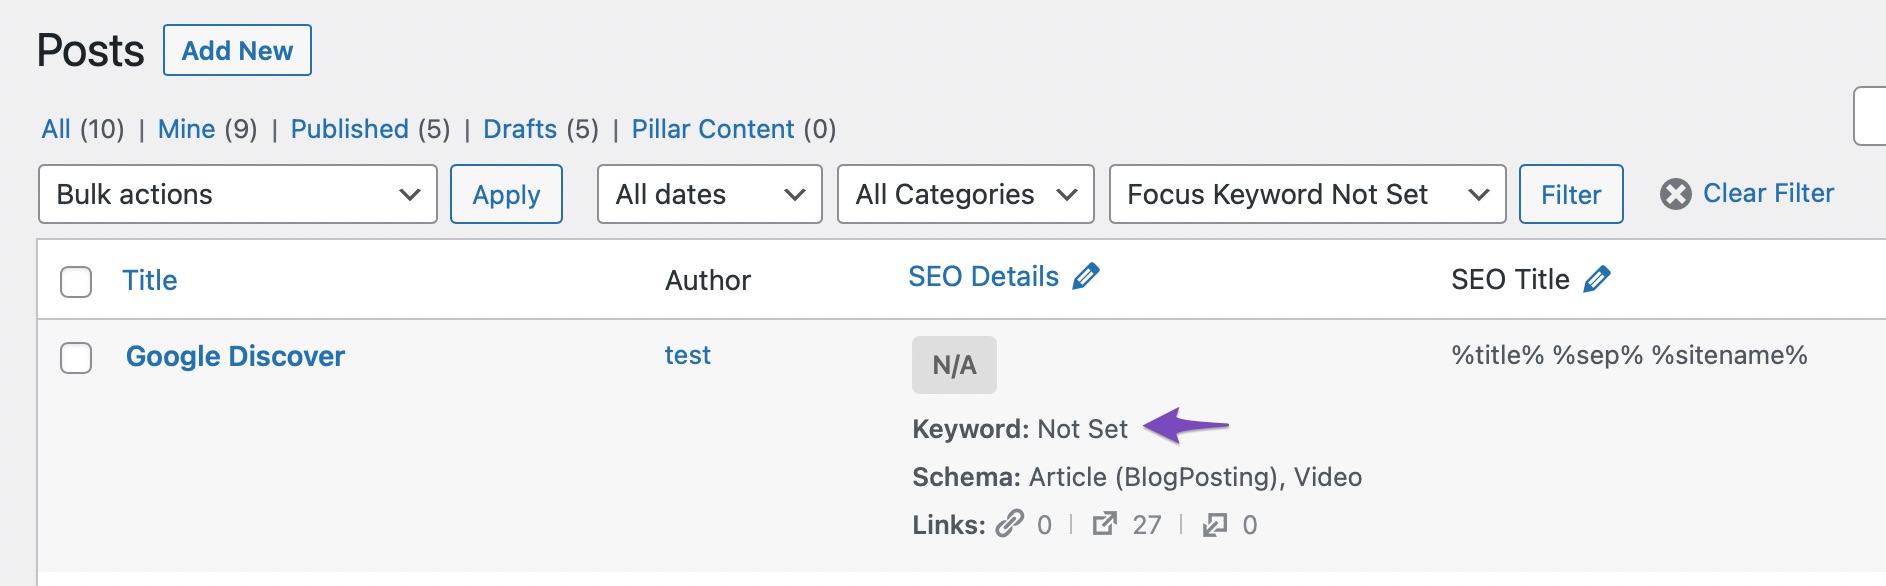 Filtered posts with no focus keyword set